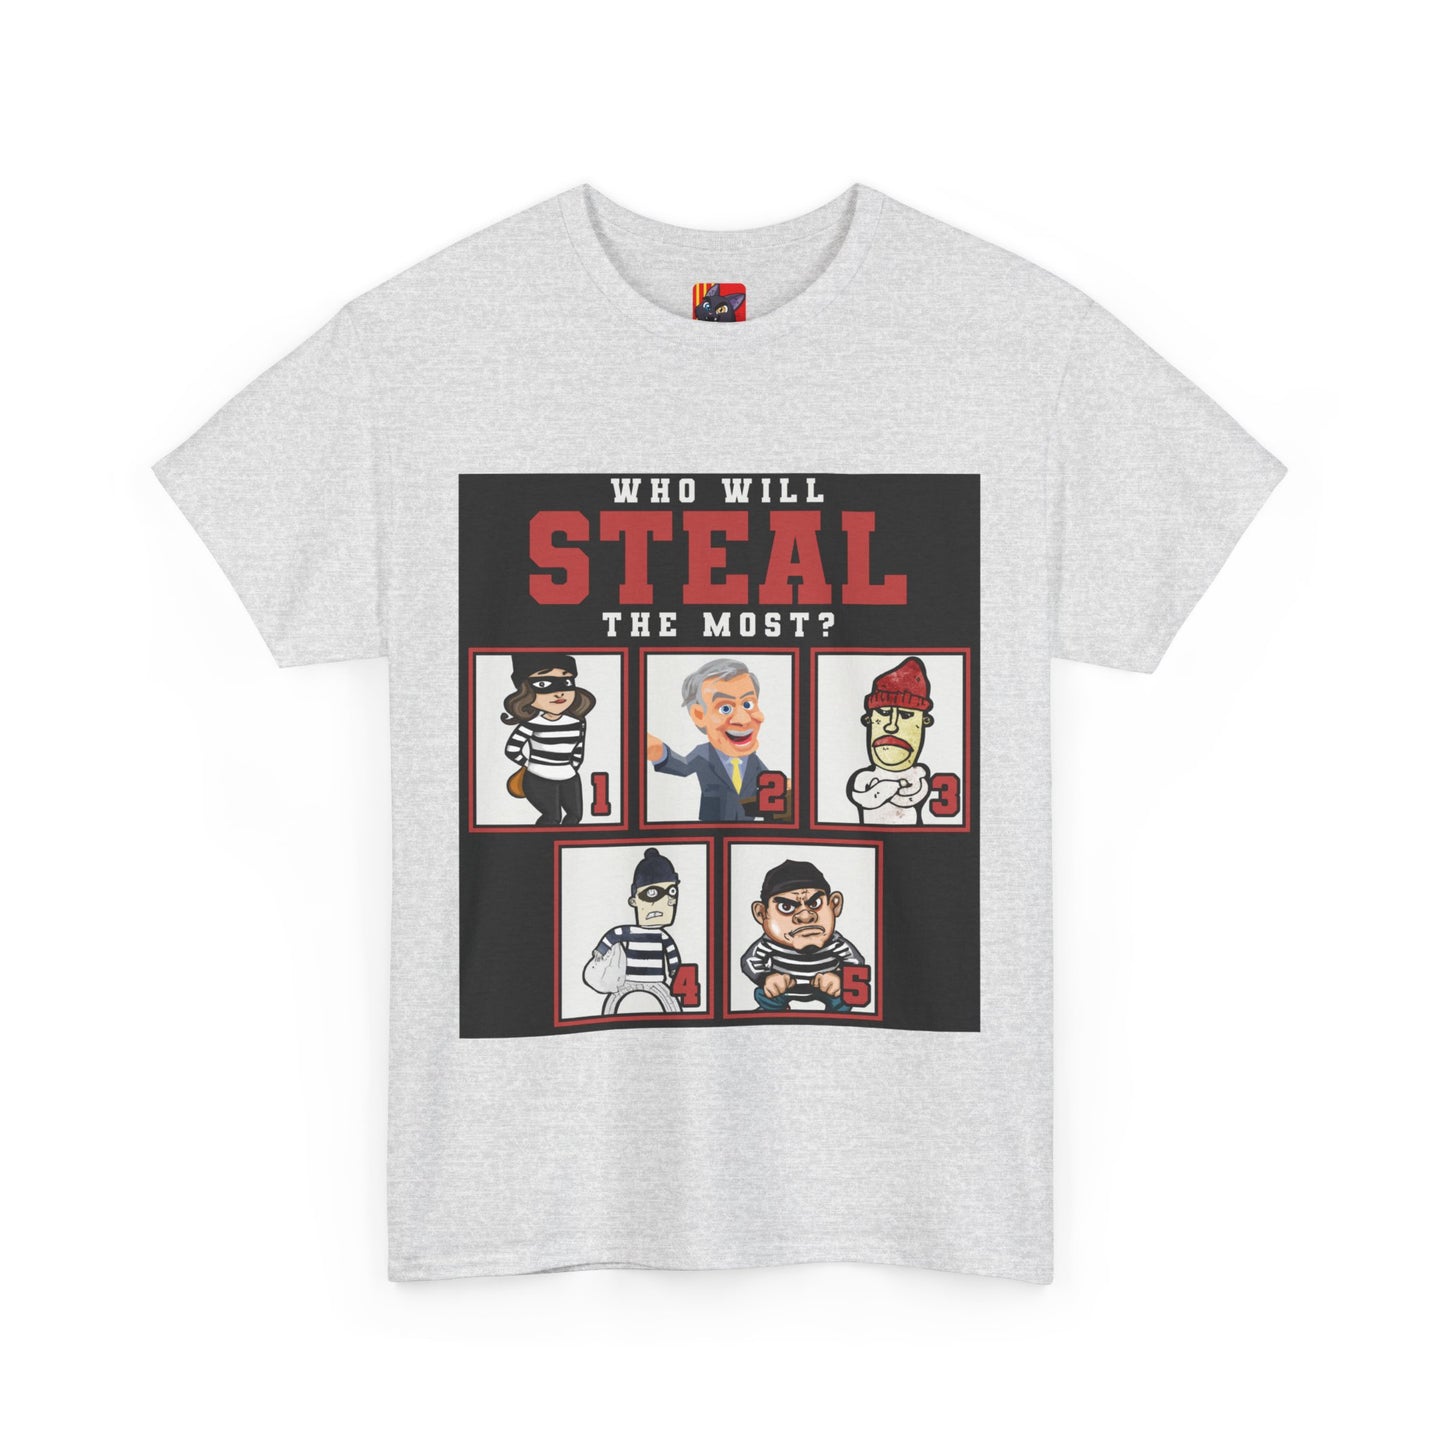 The Activist T-Shirt: Who will steal the most